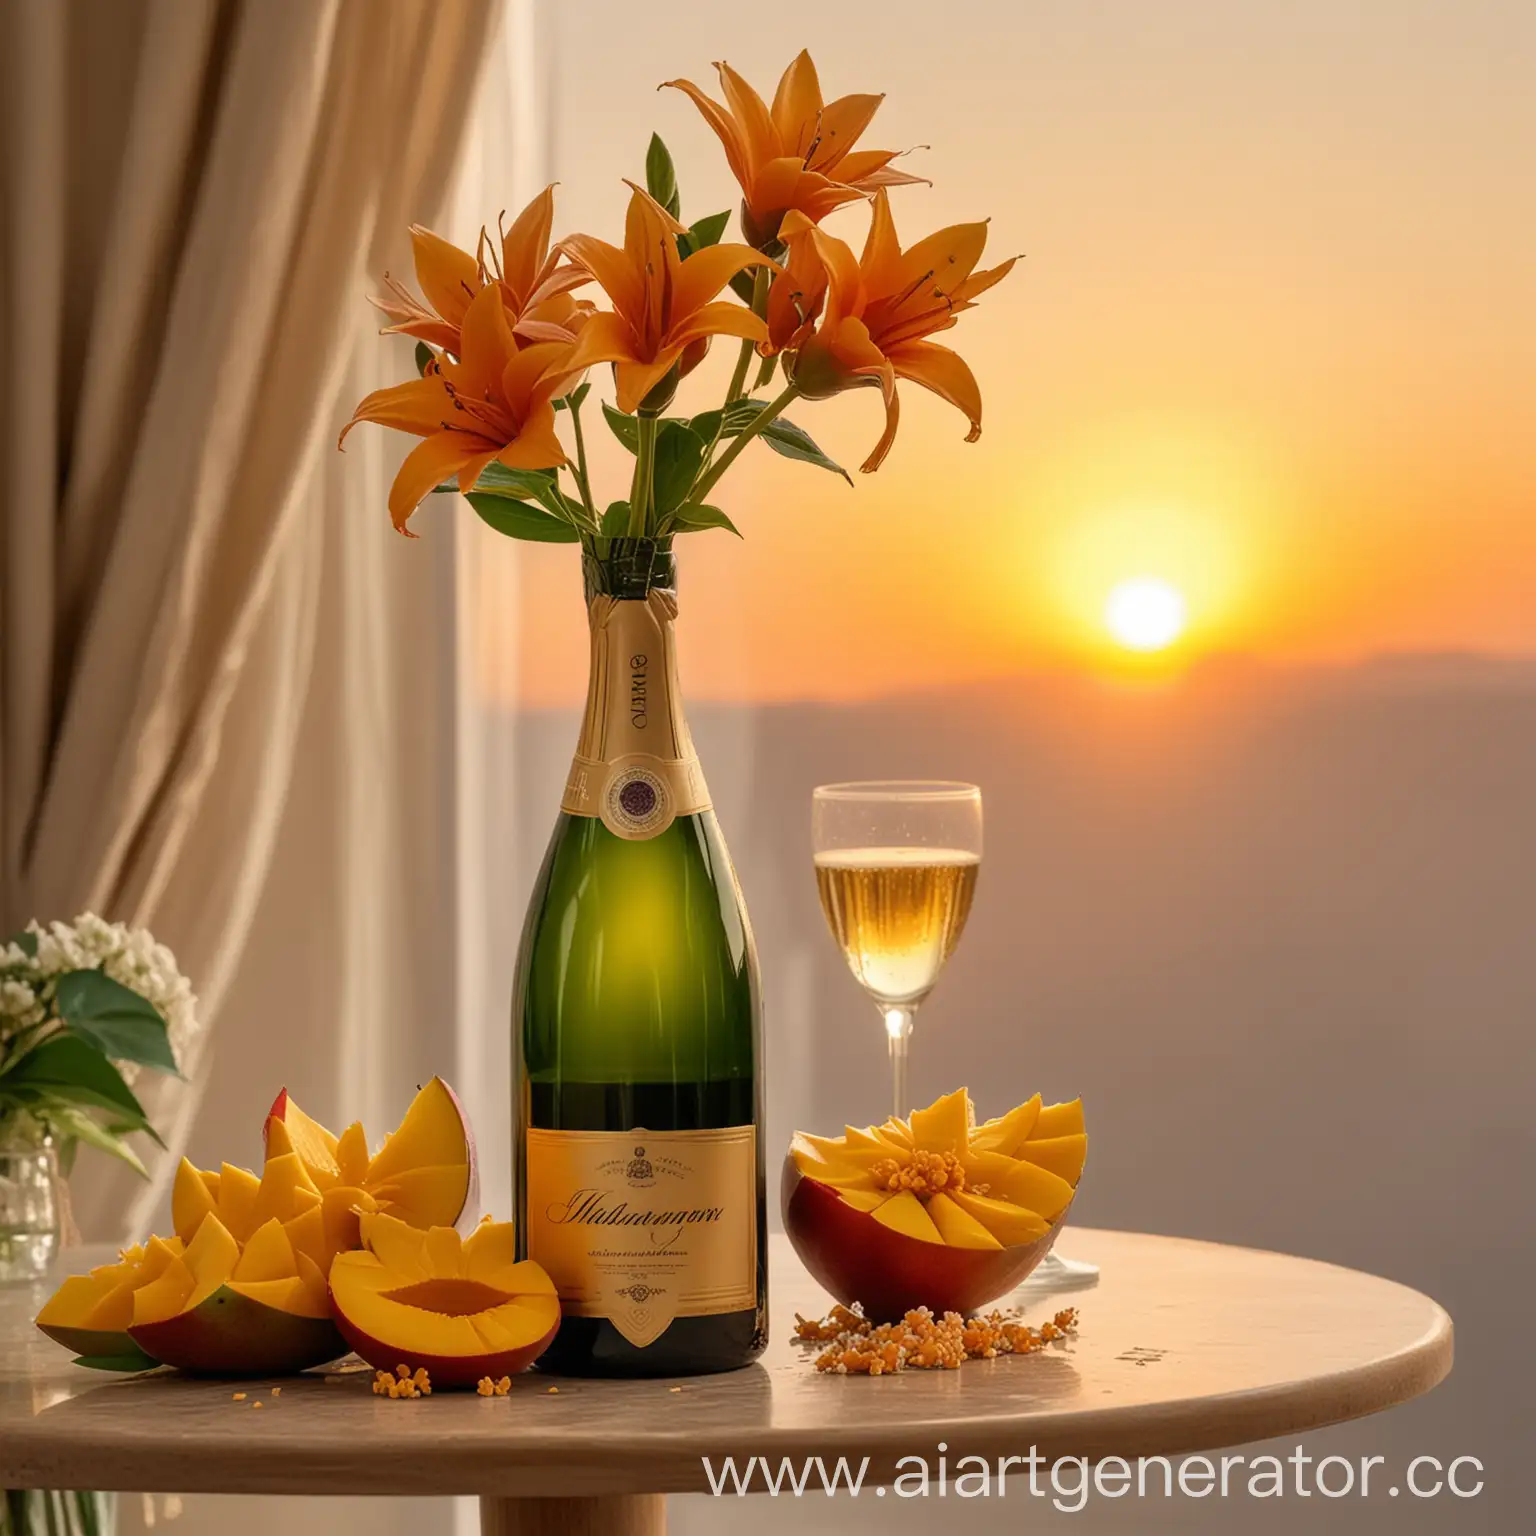 Luxurious-Morning-Champagne-Mango-and-Flowers-at-Sunrise